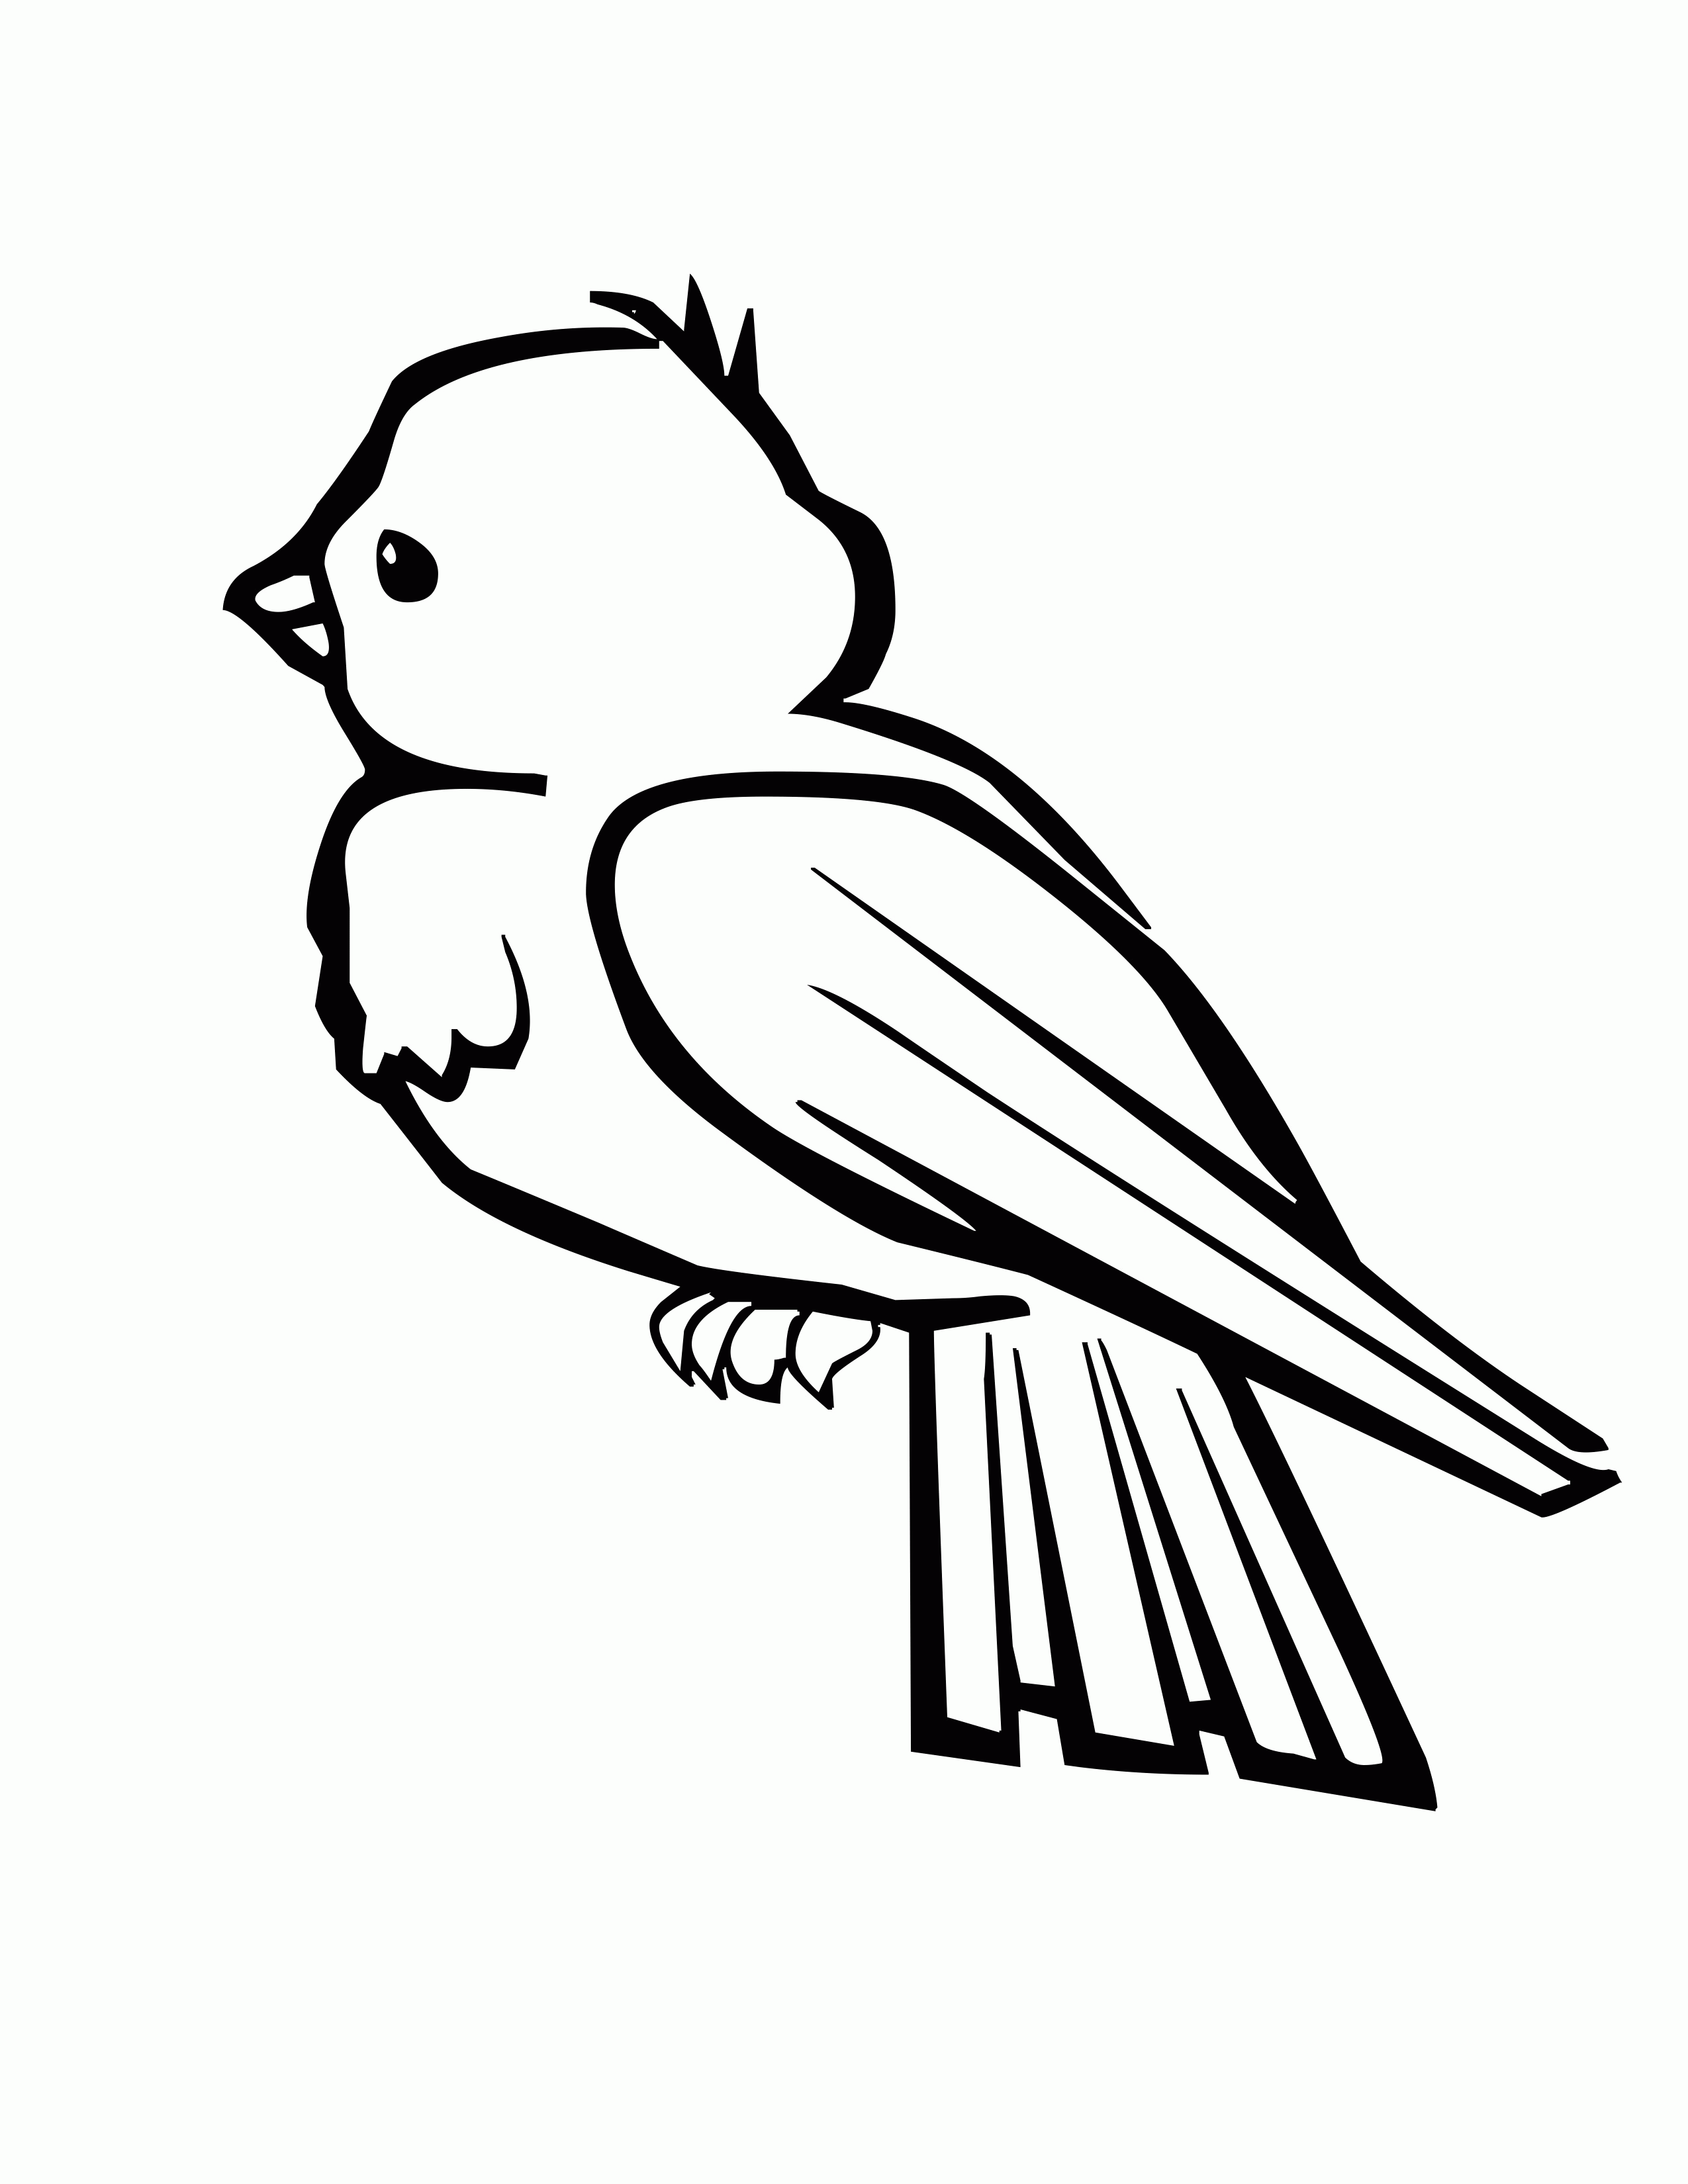 S Of Birds - Coloring Pages for Kids and for Adults